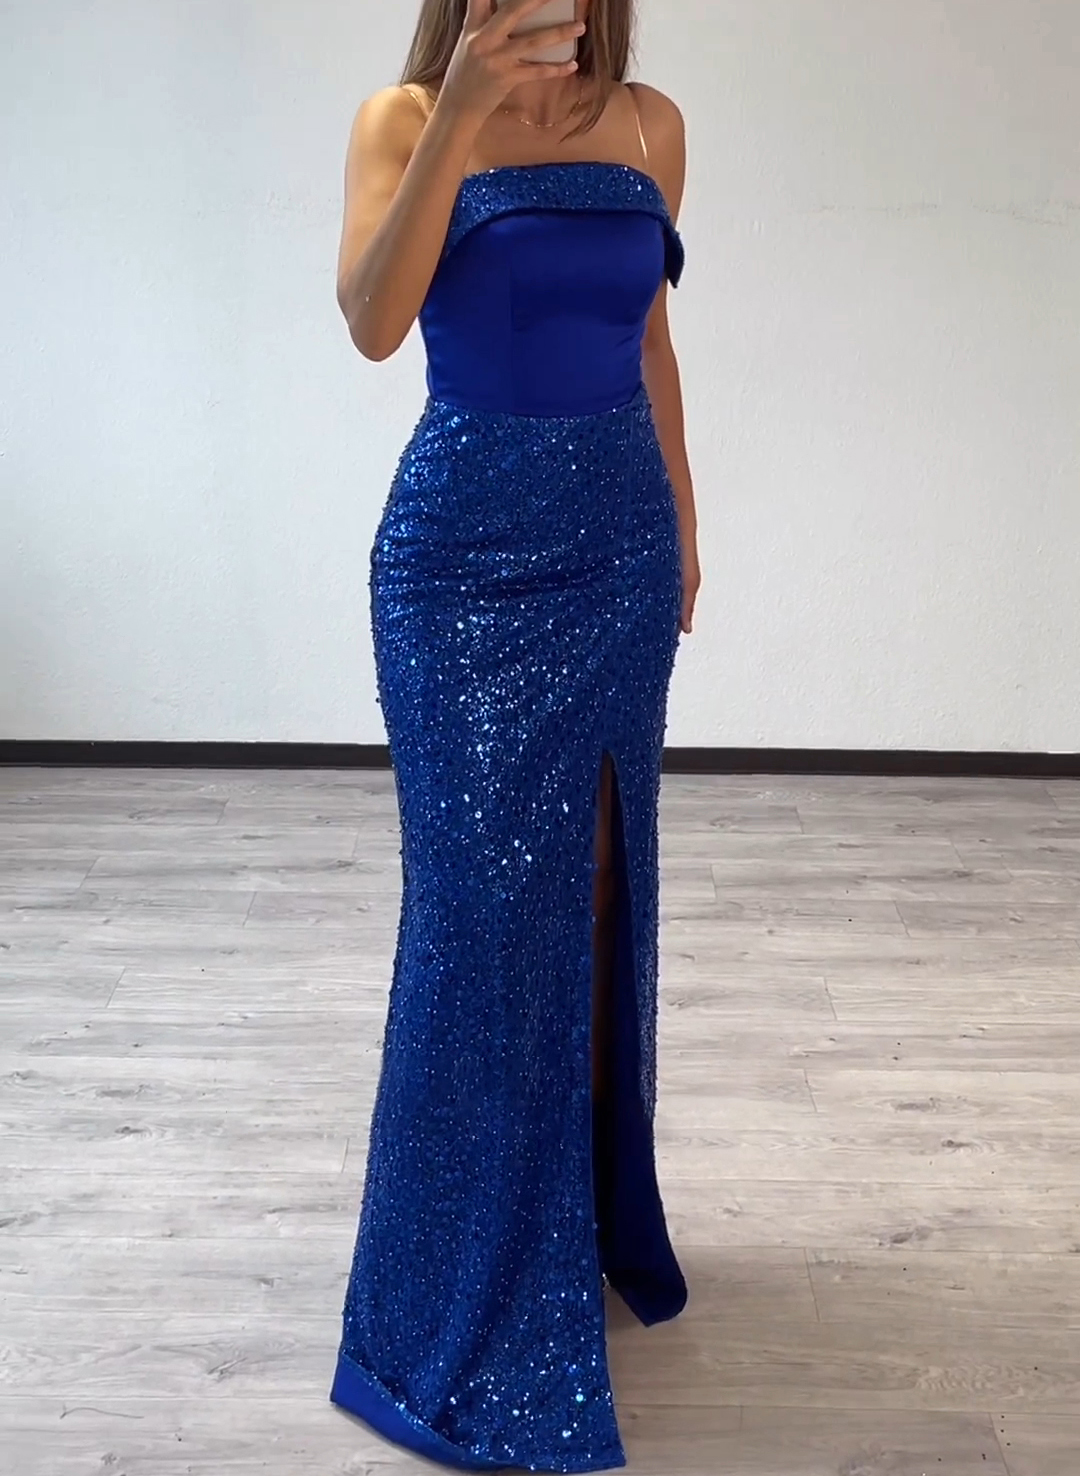 One-Shoulder Sequined Evening Dresses With Trumpet/Mermaid